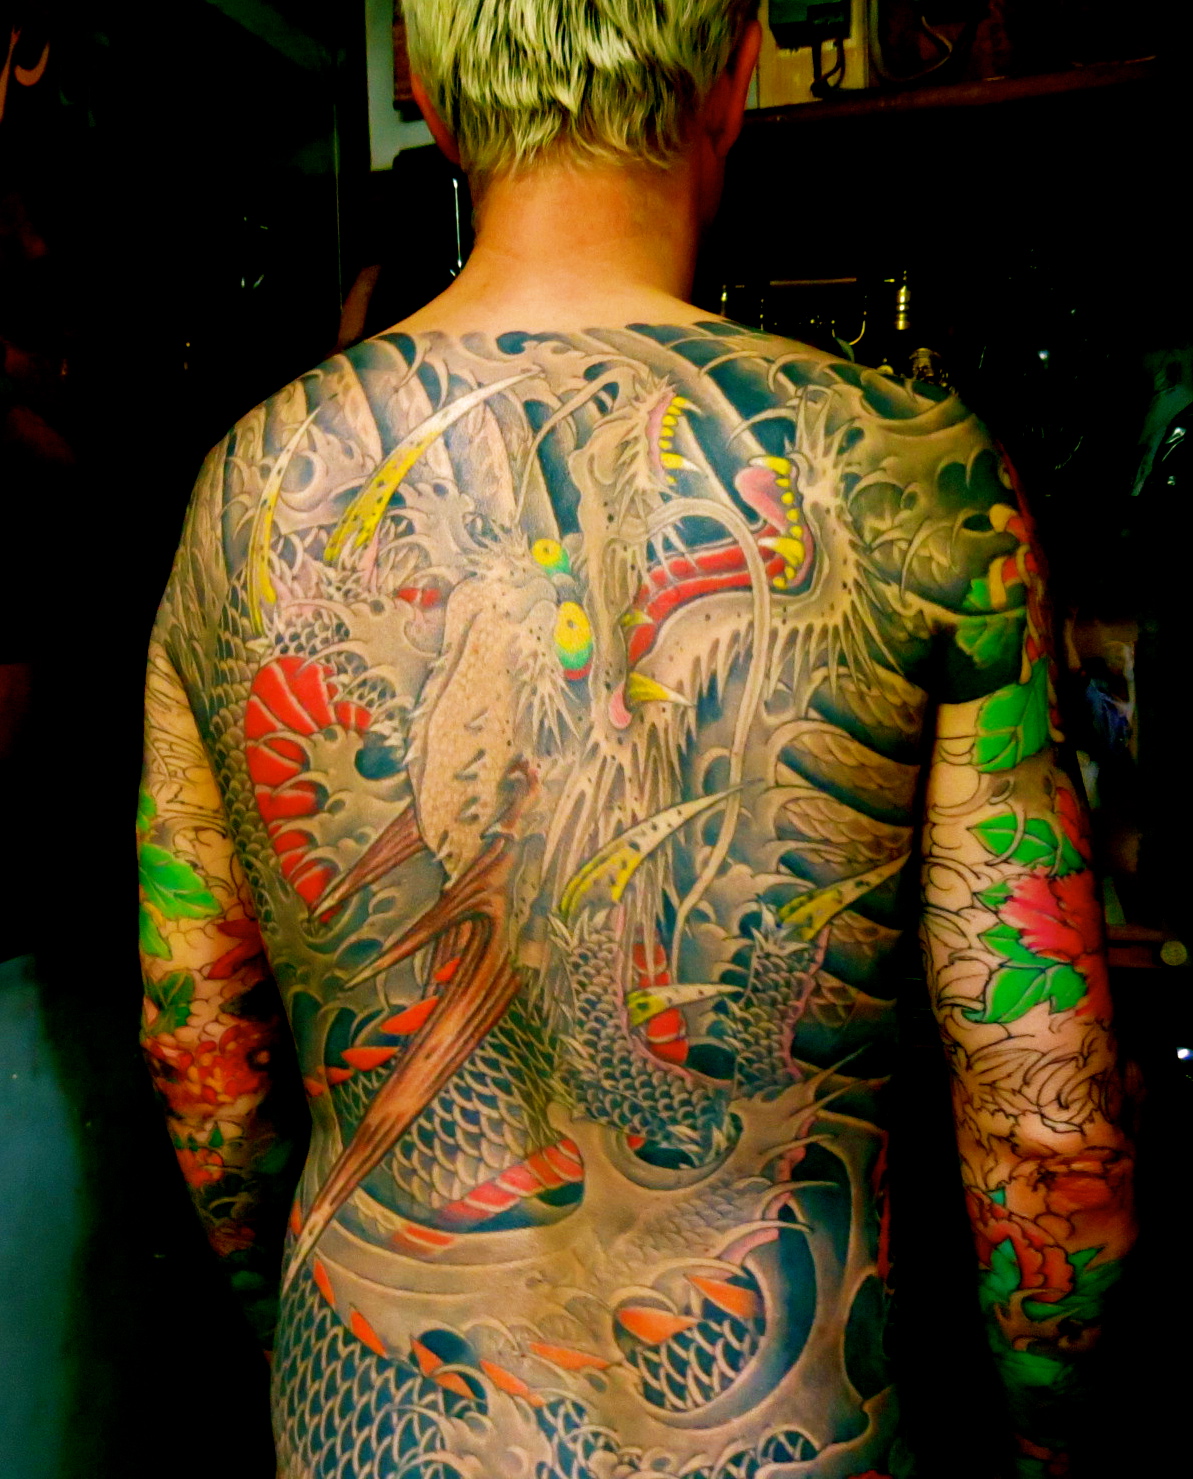 350+ Japanese Yakuza Tattoos With Meanings and History (2020) Irezumi  Designs | Yakuza tattoo, Japanese tattoo, Traditional japanese tattoos